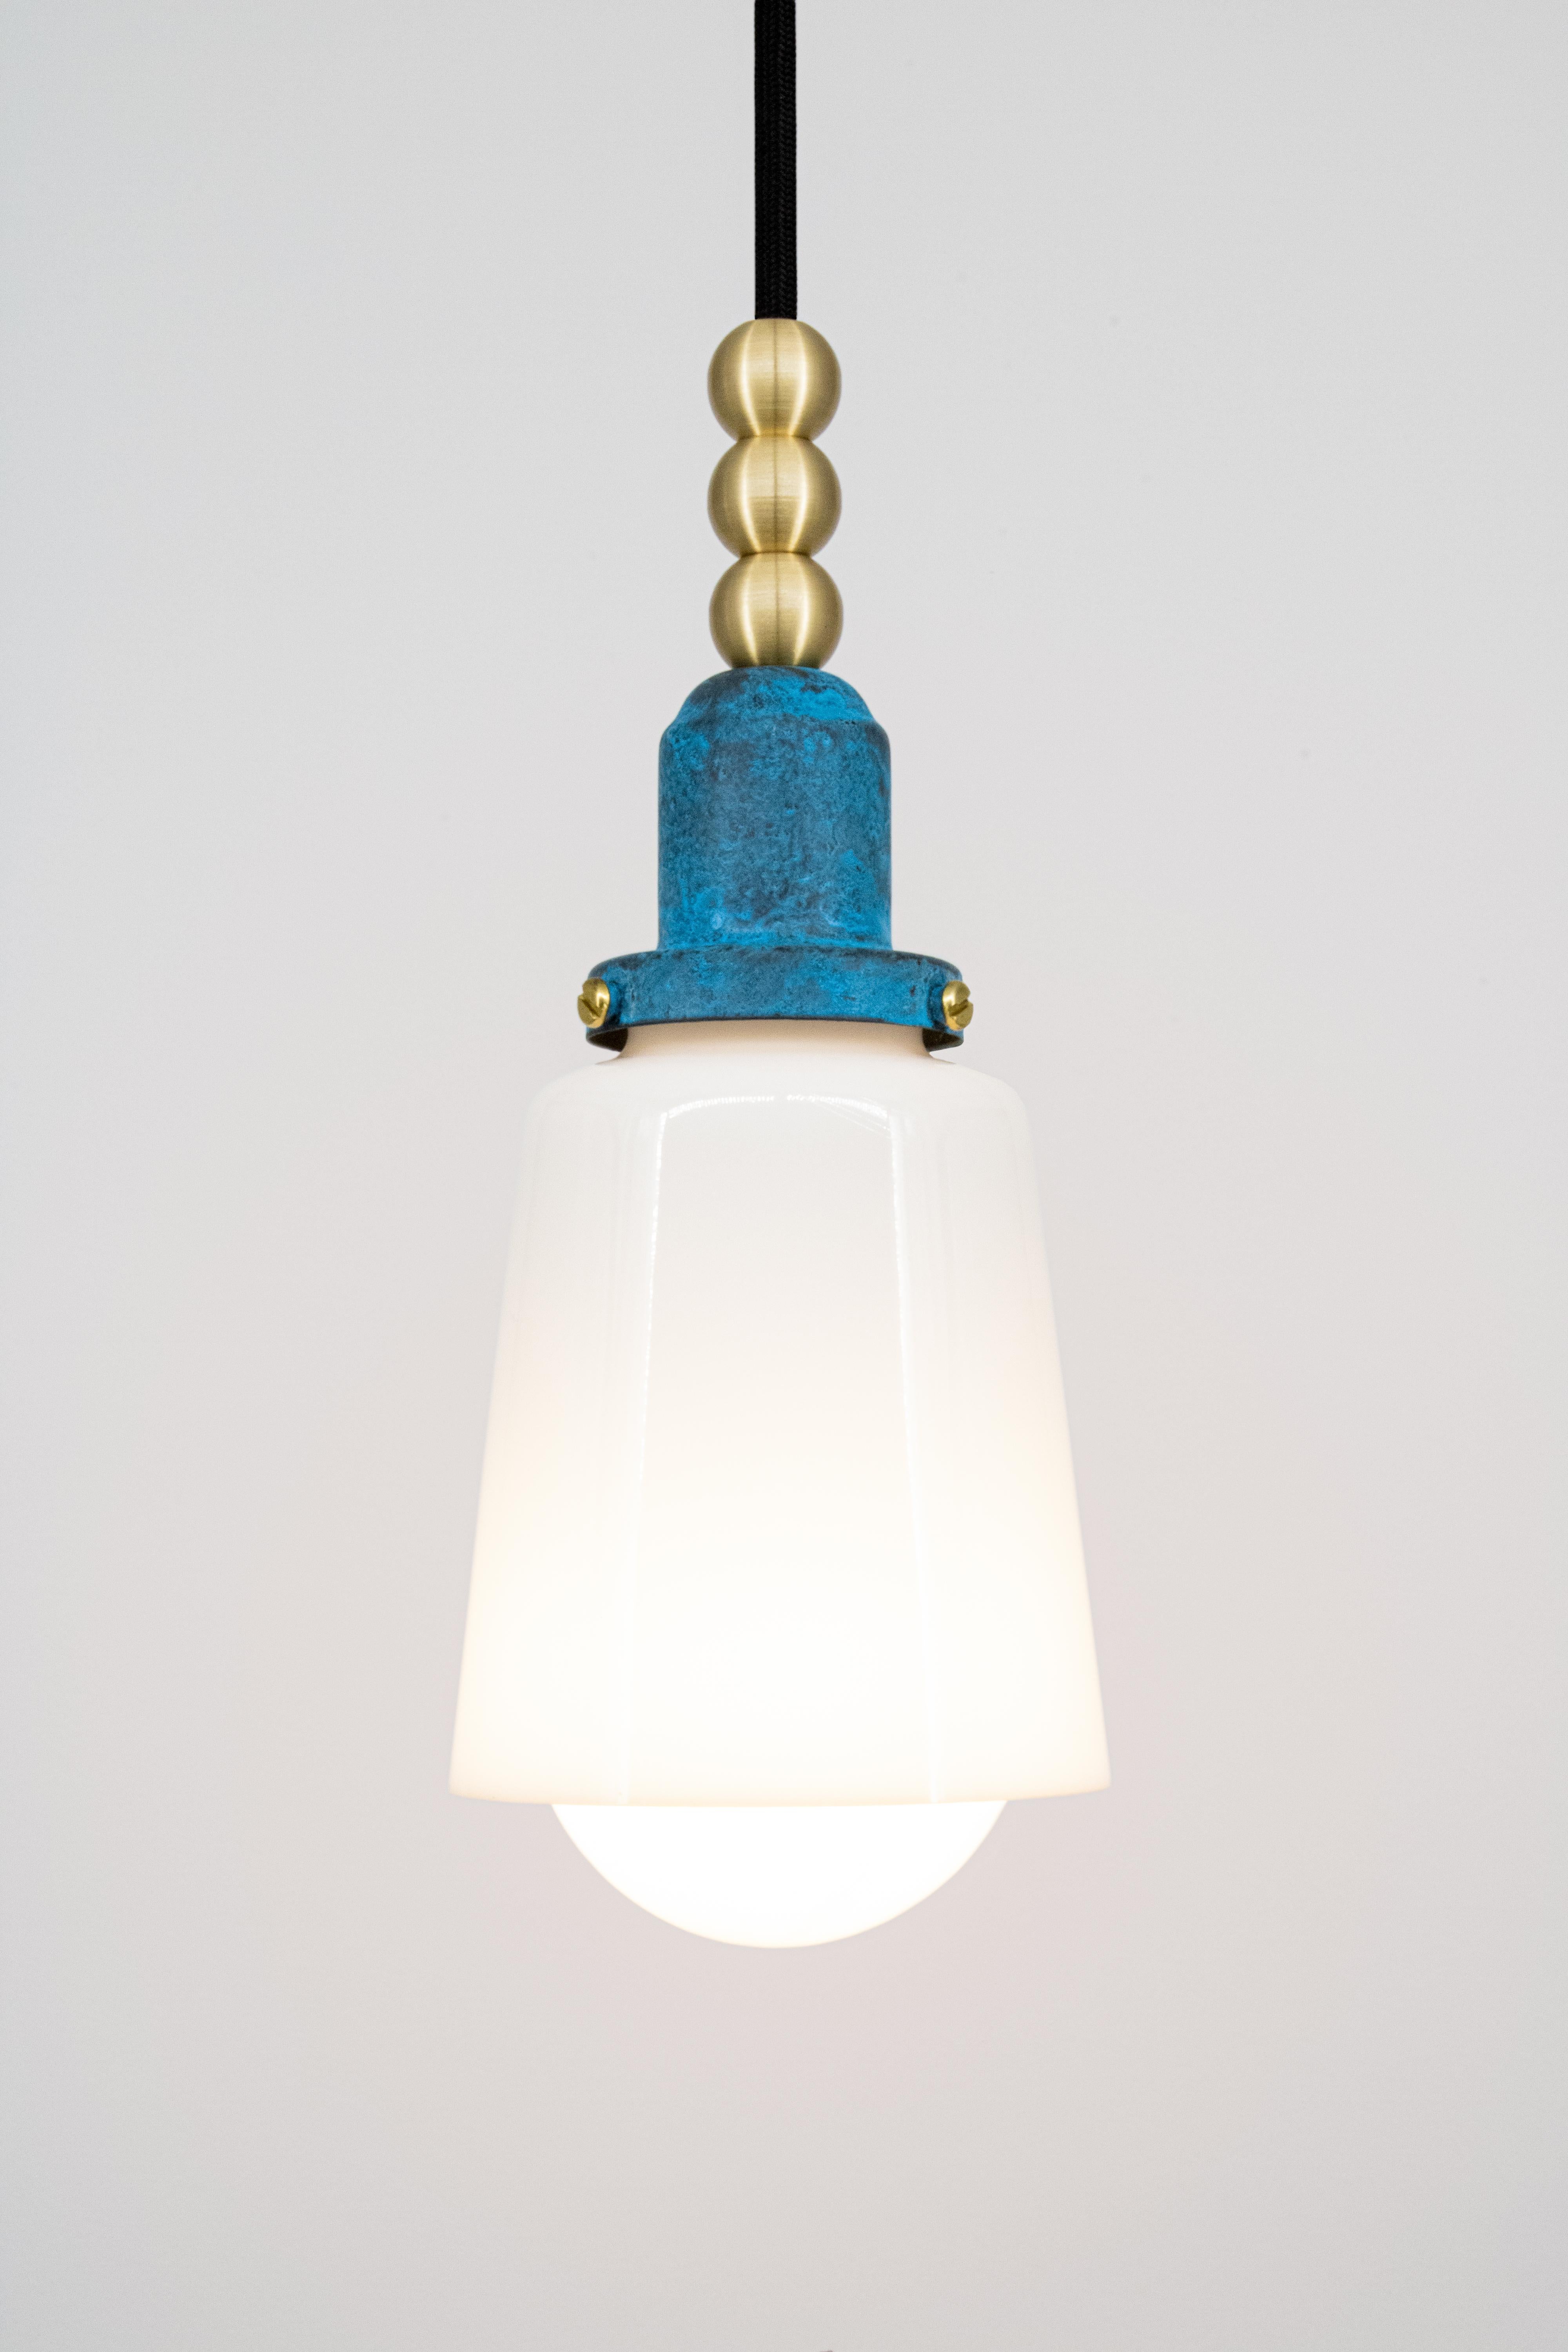 Produced by Trella’s skilled team of artisans, the Therese Pendant light is a small vet versatile fixture. Perfect for use over bars, nightstands, kitchen islands, or any space in need of a warm inviting glow. The Therese pendant light features a